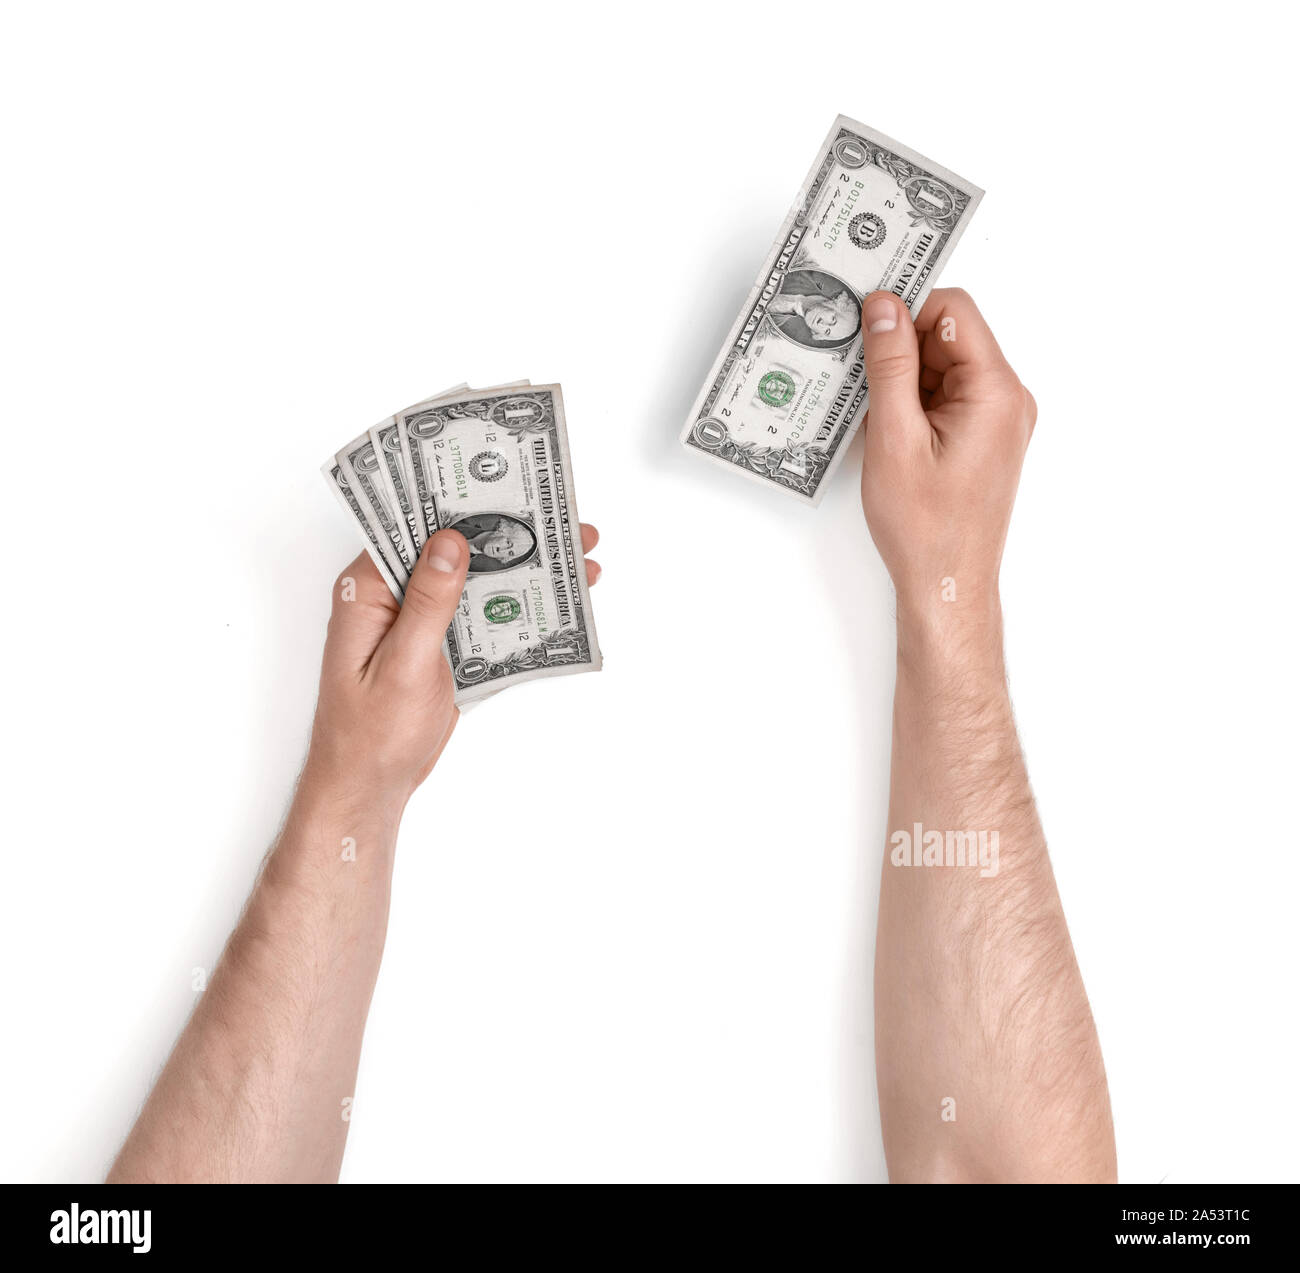 Close up view of man's hands counting dollar bills, isolated on white background. Stock Photo